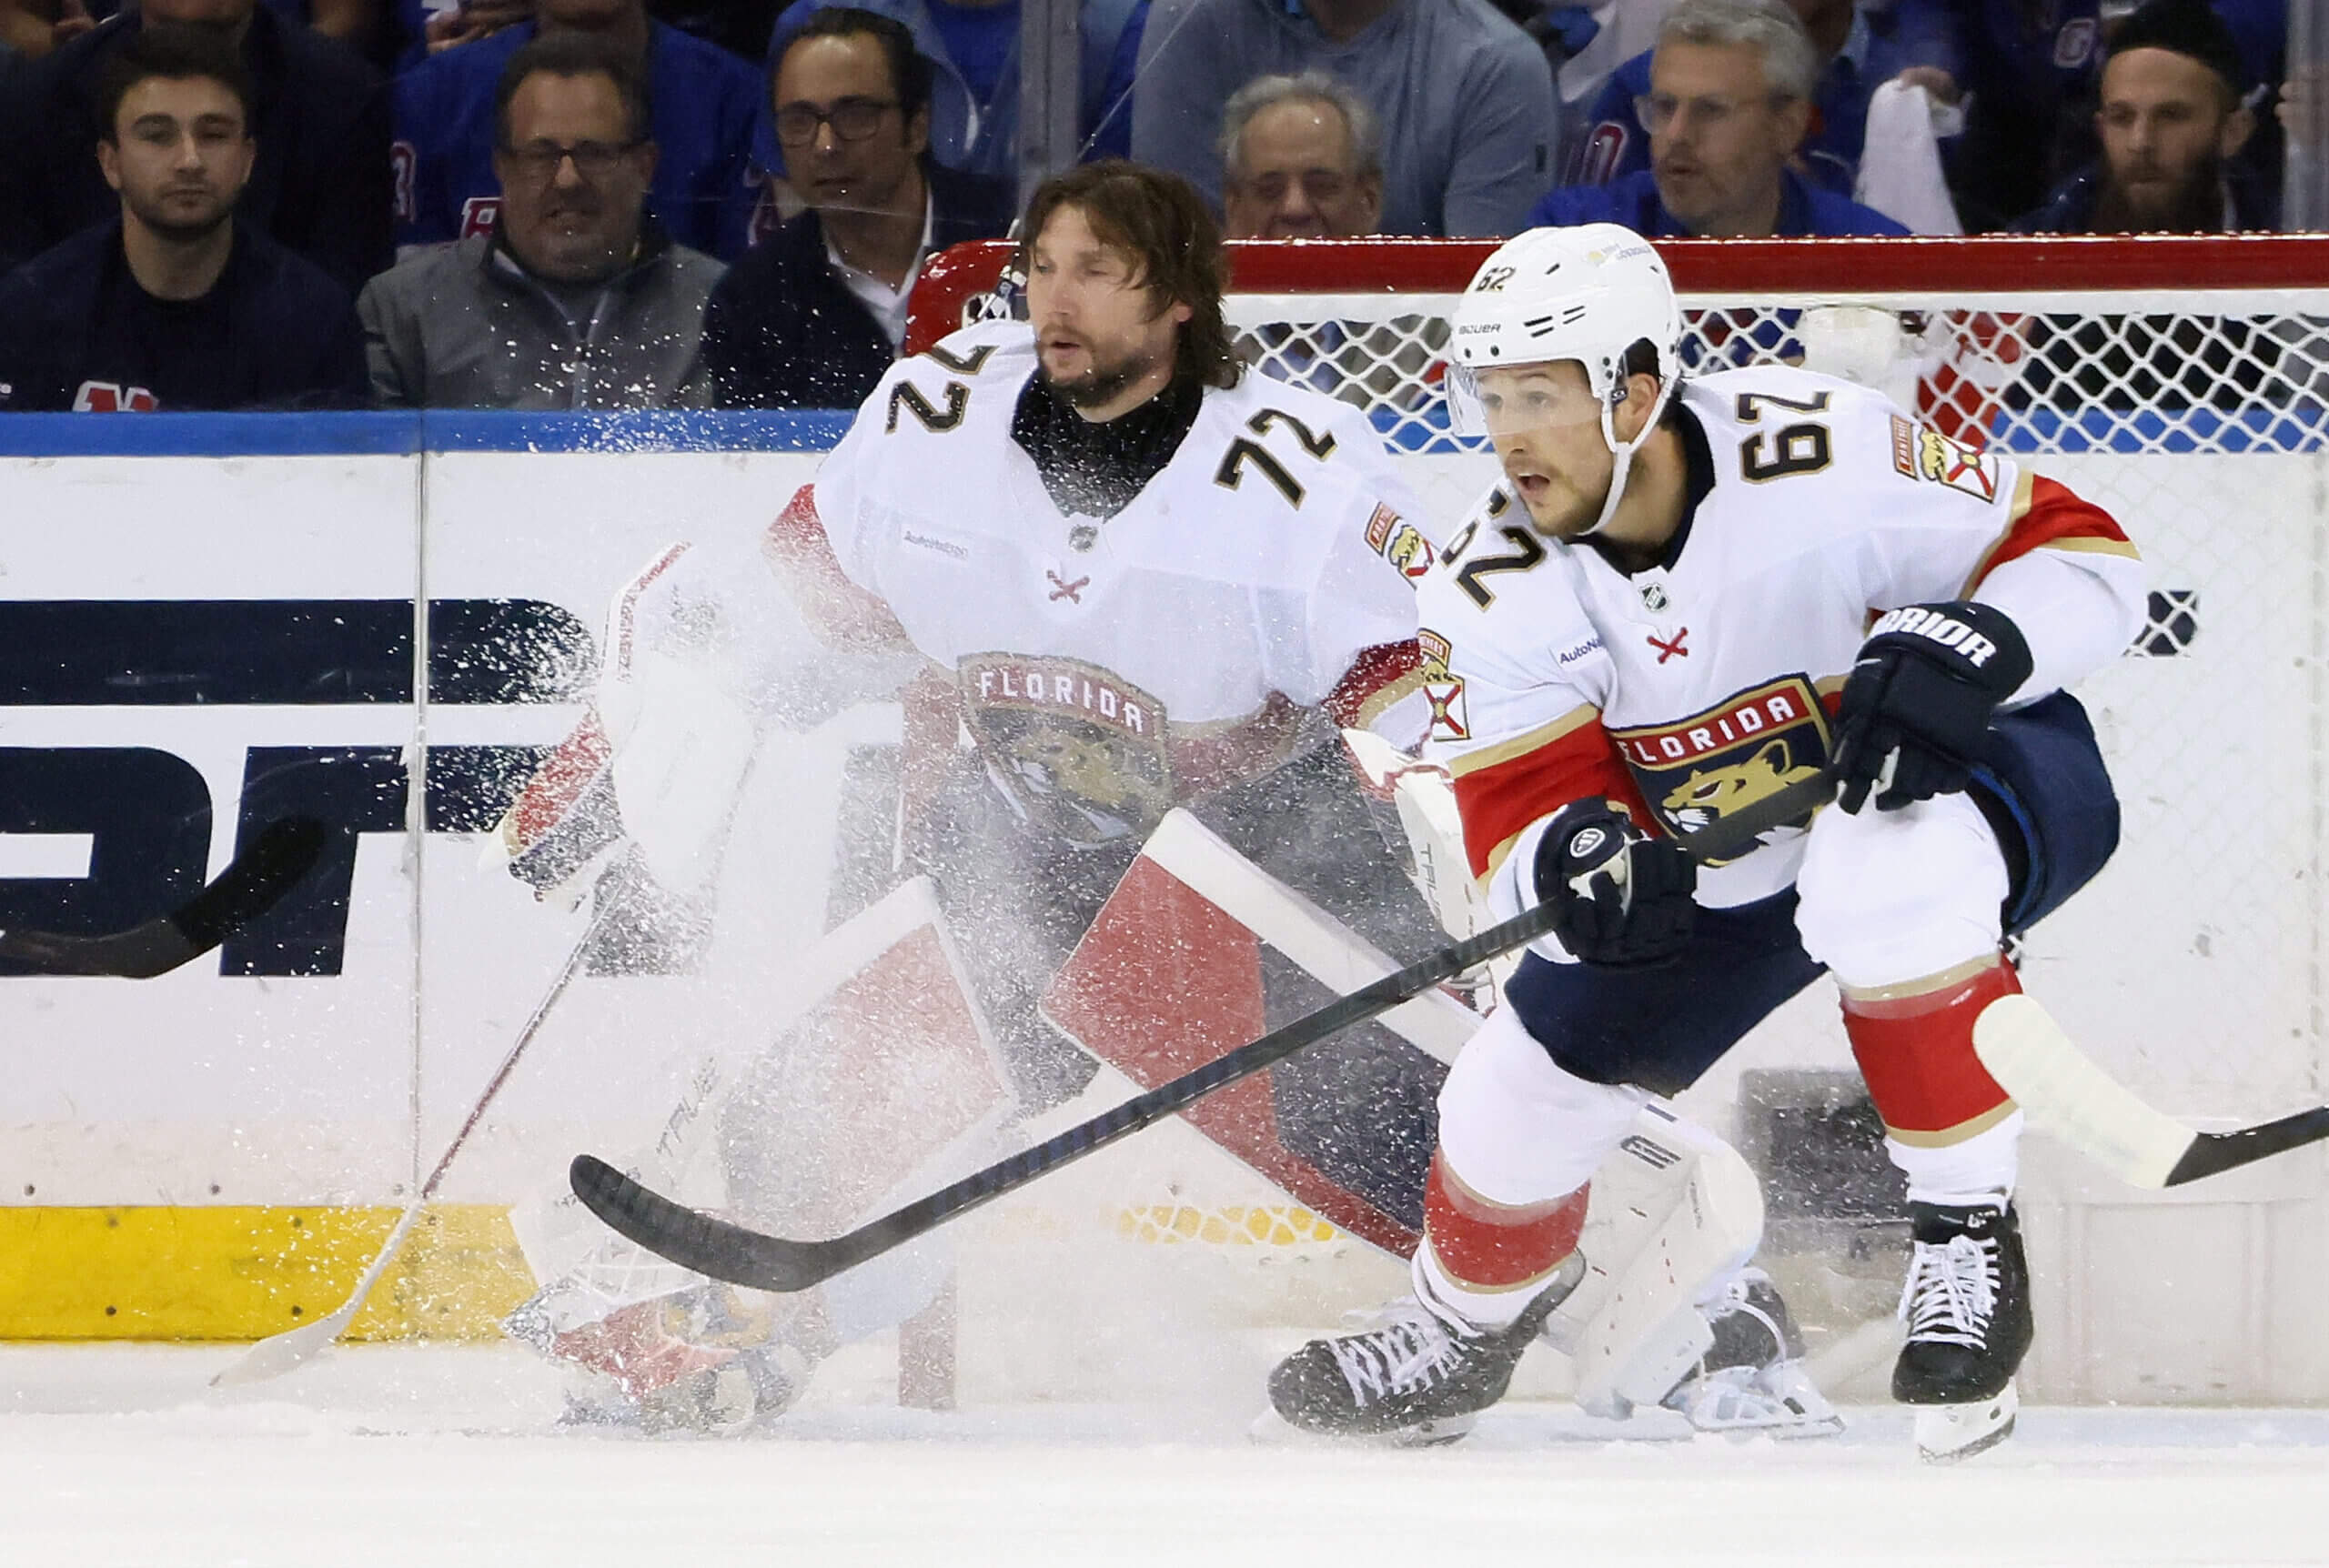 Rangers vs. Panthers Game 2 odds, expert picks: New York looks to even series at home